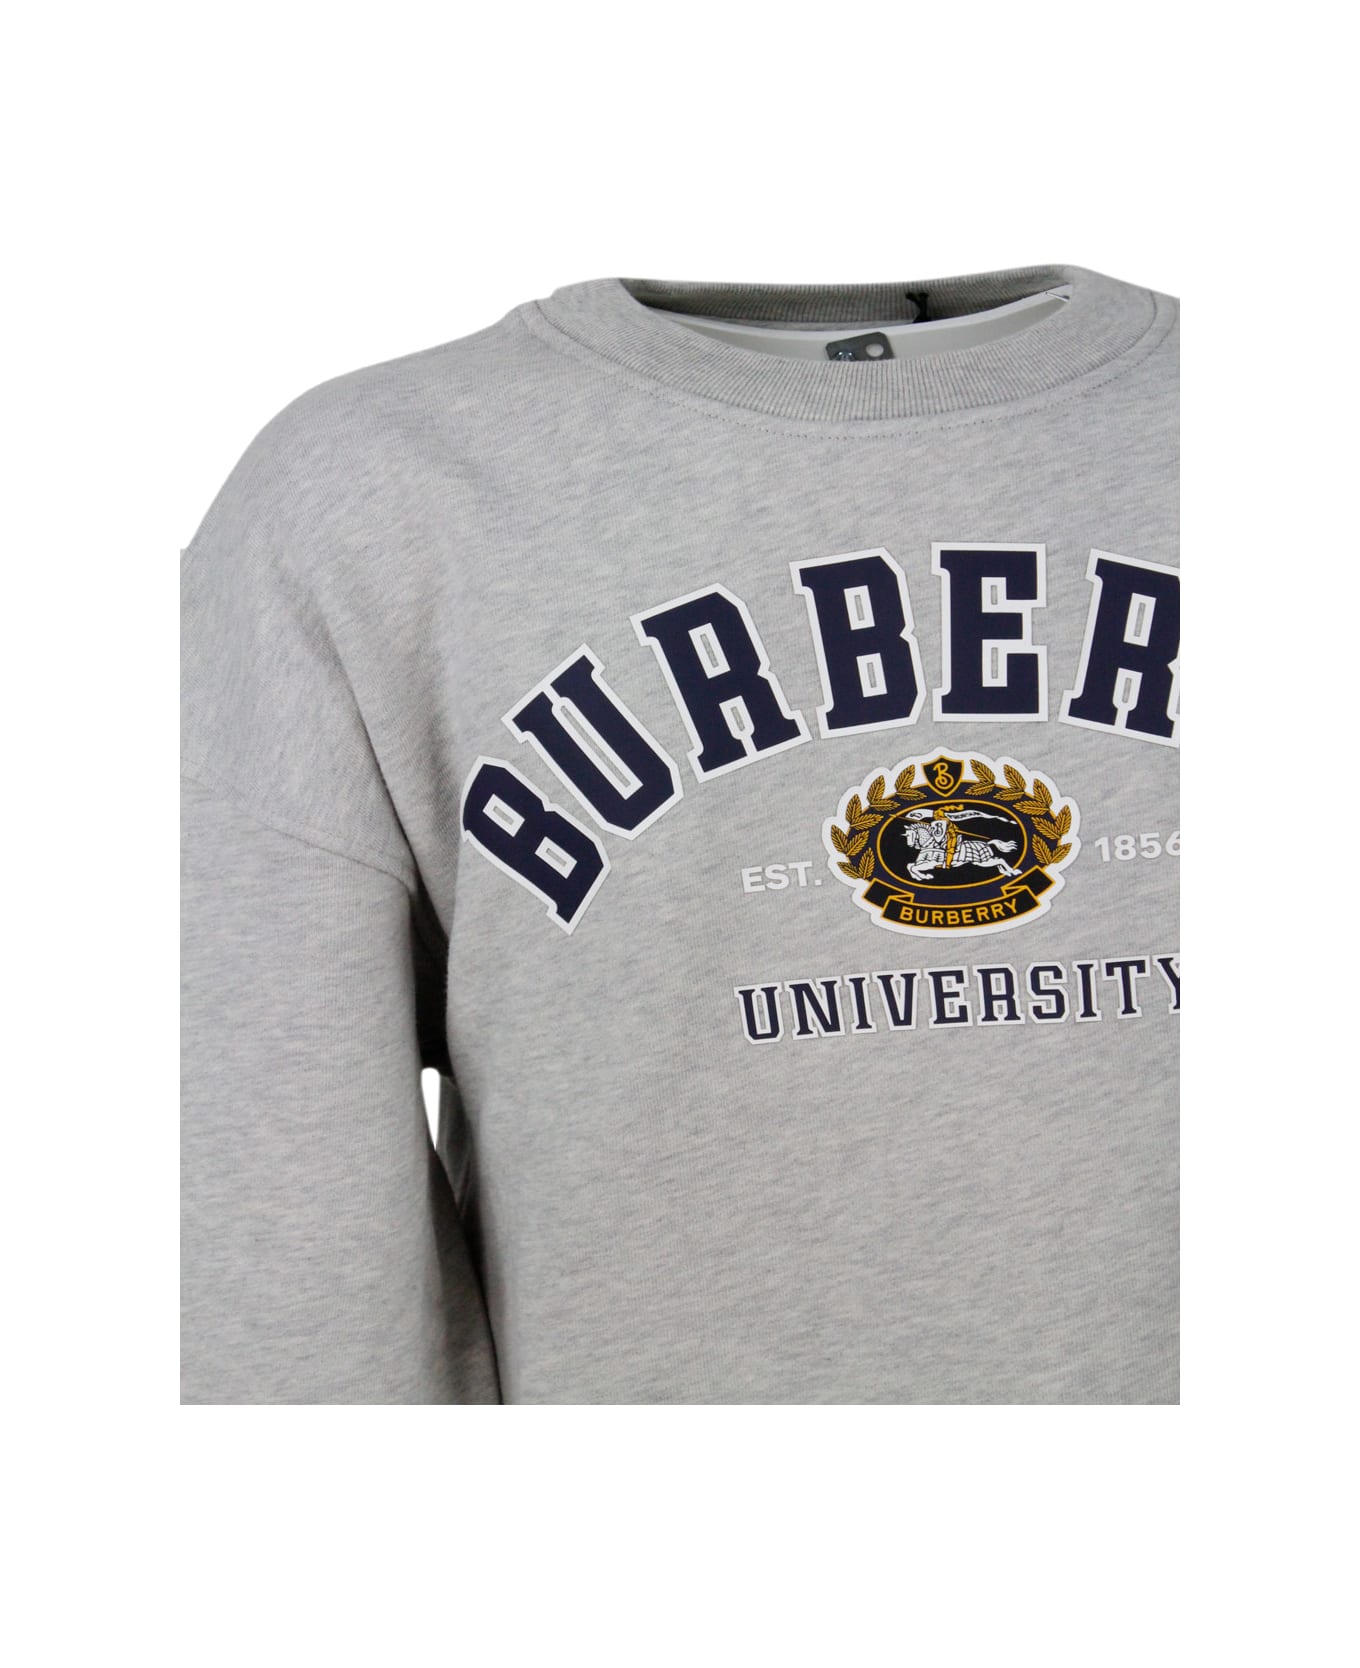 Burberry Crewneck Sweatshirt In Cotton Jersey With Logo Print And University Writing On The Front - Grey ニットウェア＆スウェットシャツ